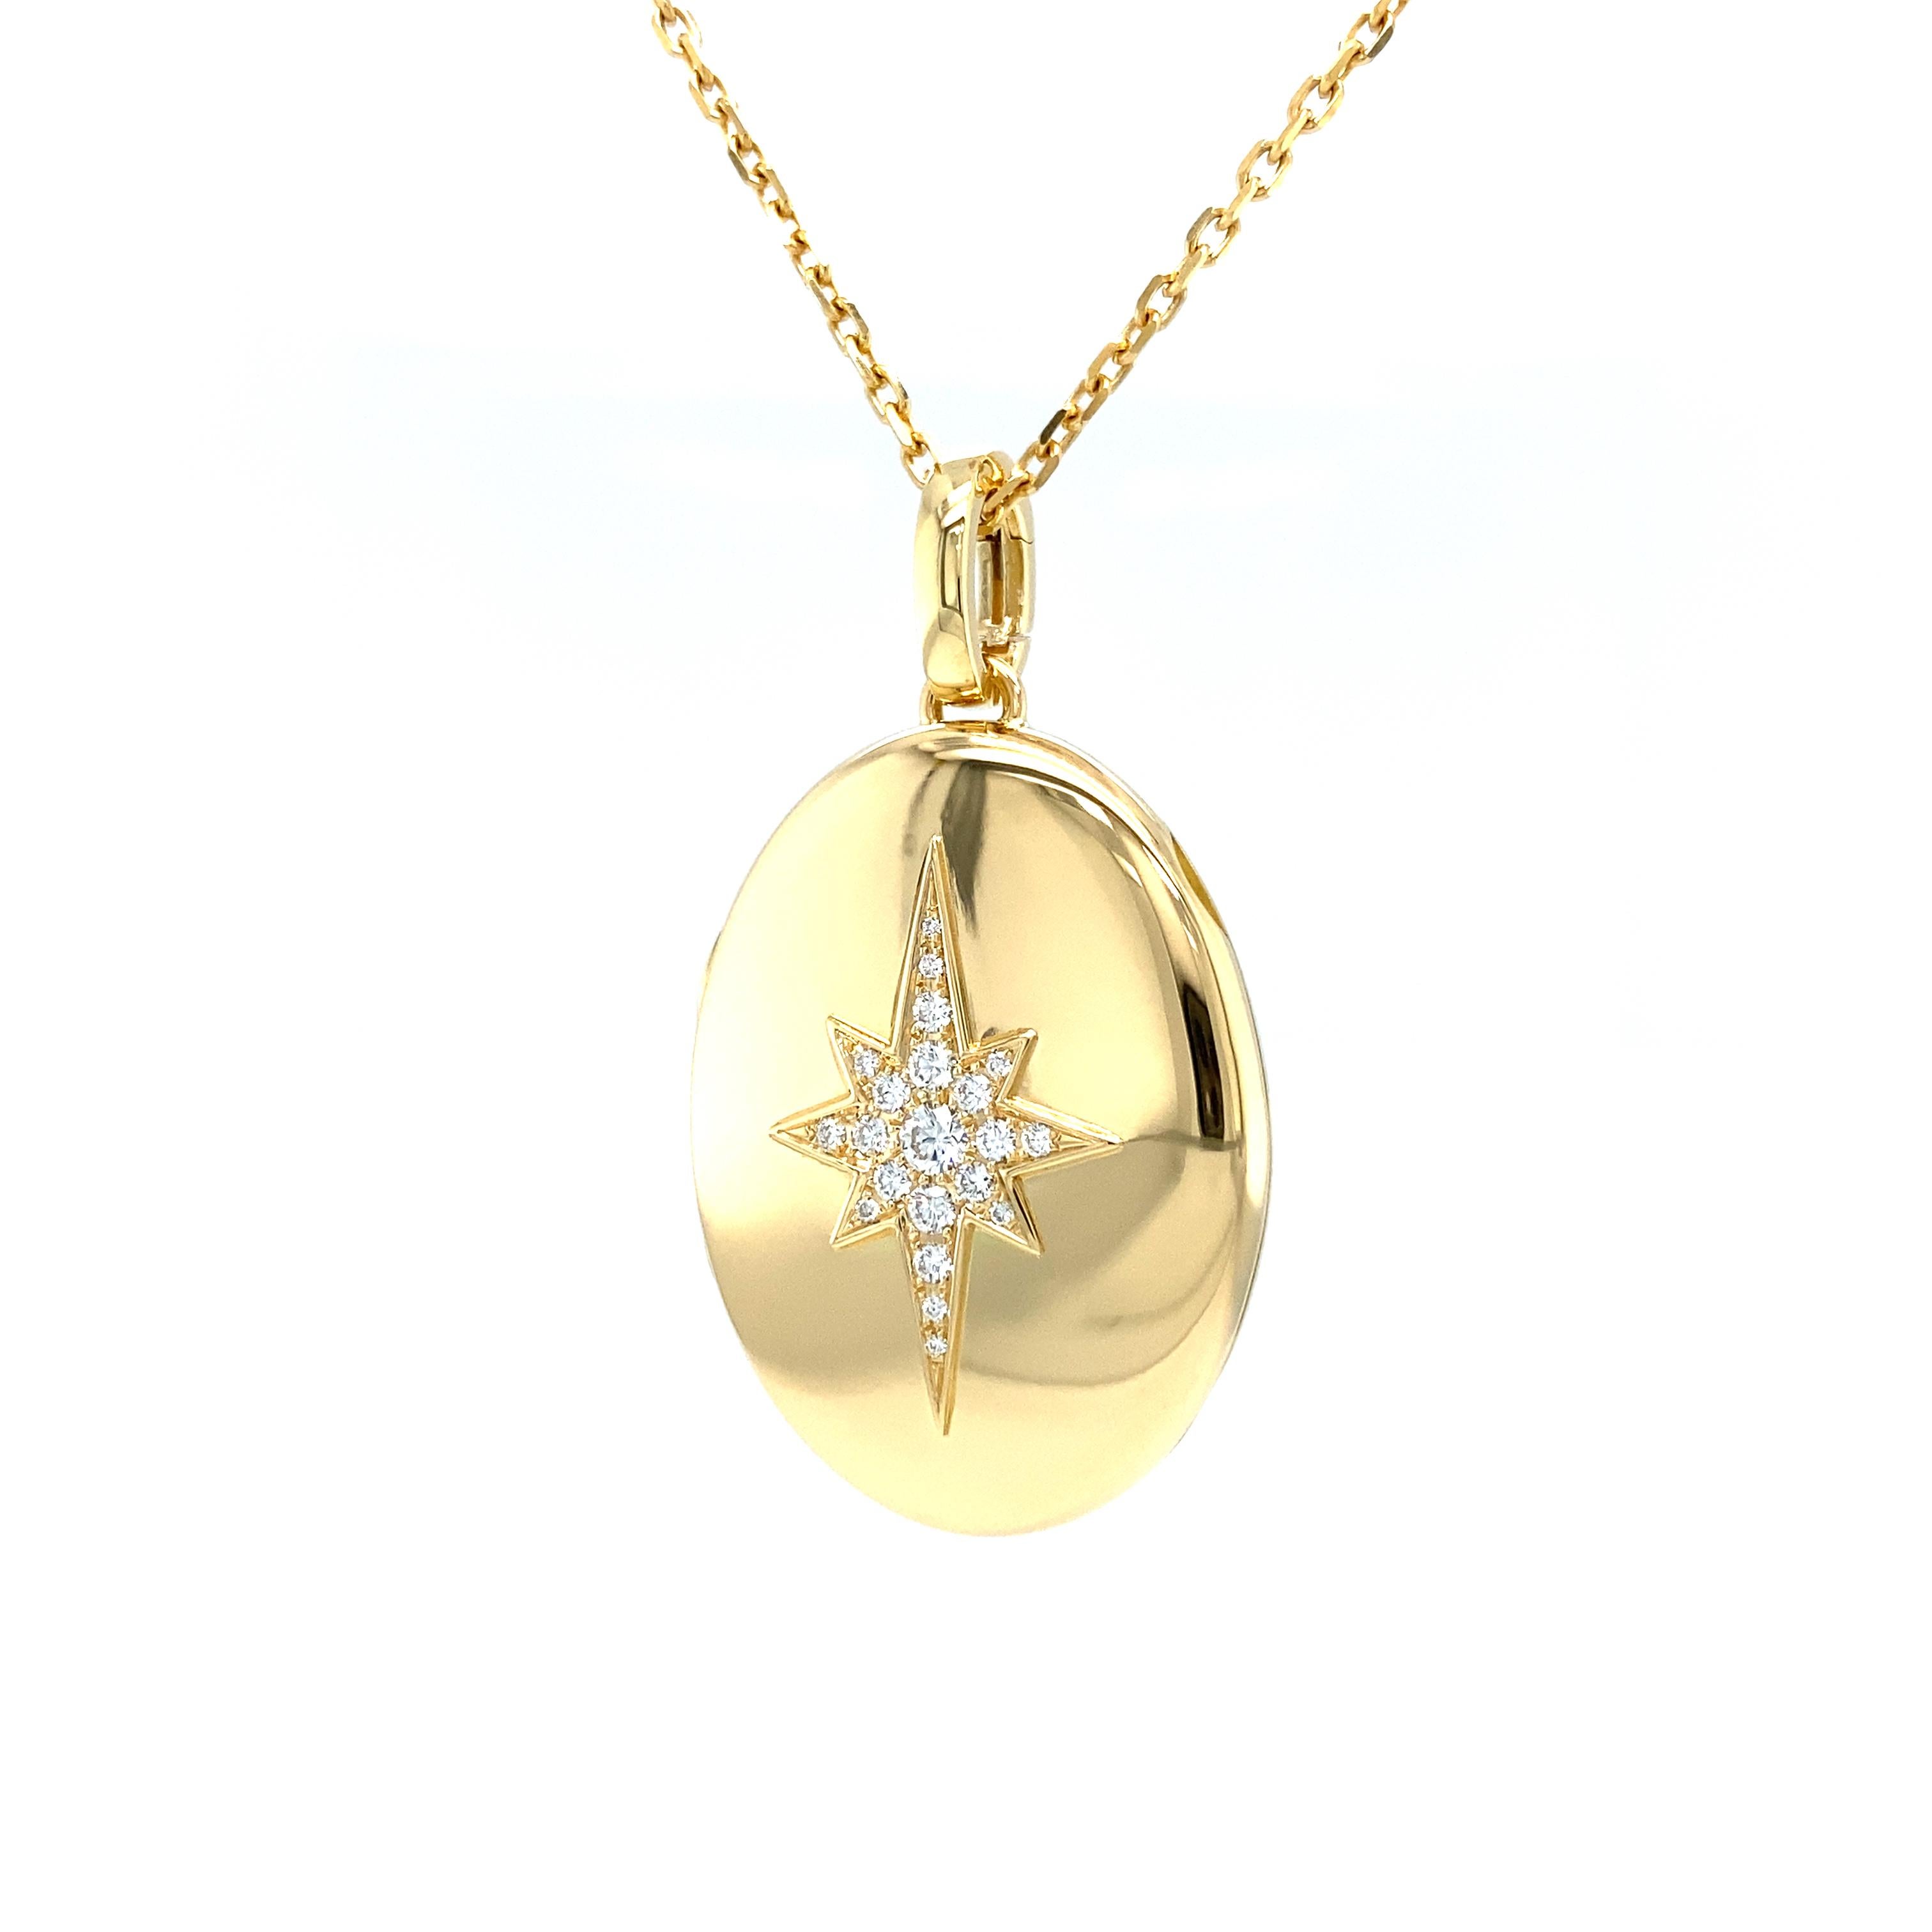 Victor Mayer customizable oval polished locket pendant 18k yellow gold, Victoria Collection, 21diamonds, total  .33ct ct, G VS, brilliant cut, measurements app. 35.2 mm x 25.8 mm

About the creator Victor Mayer
Victor Mayer is internationally